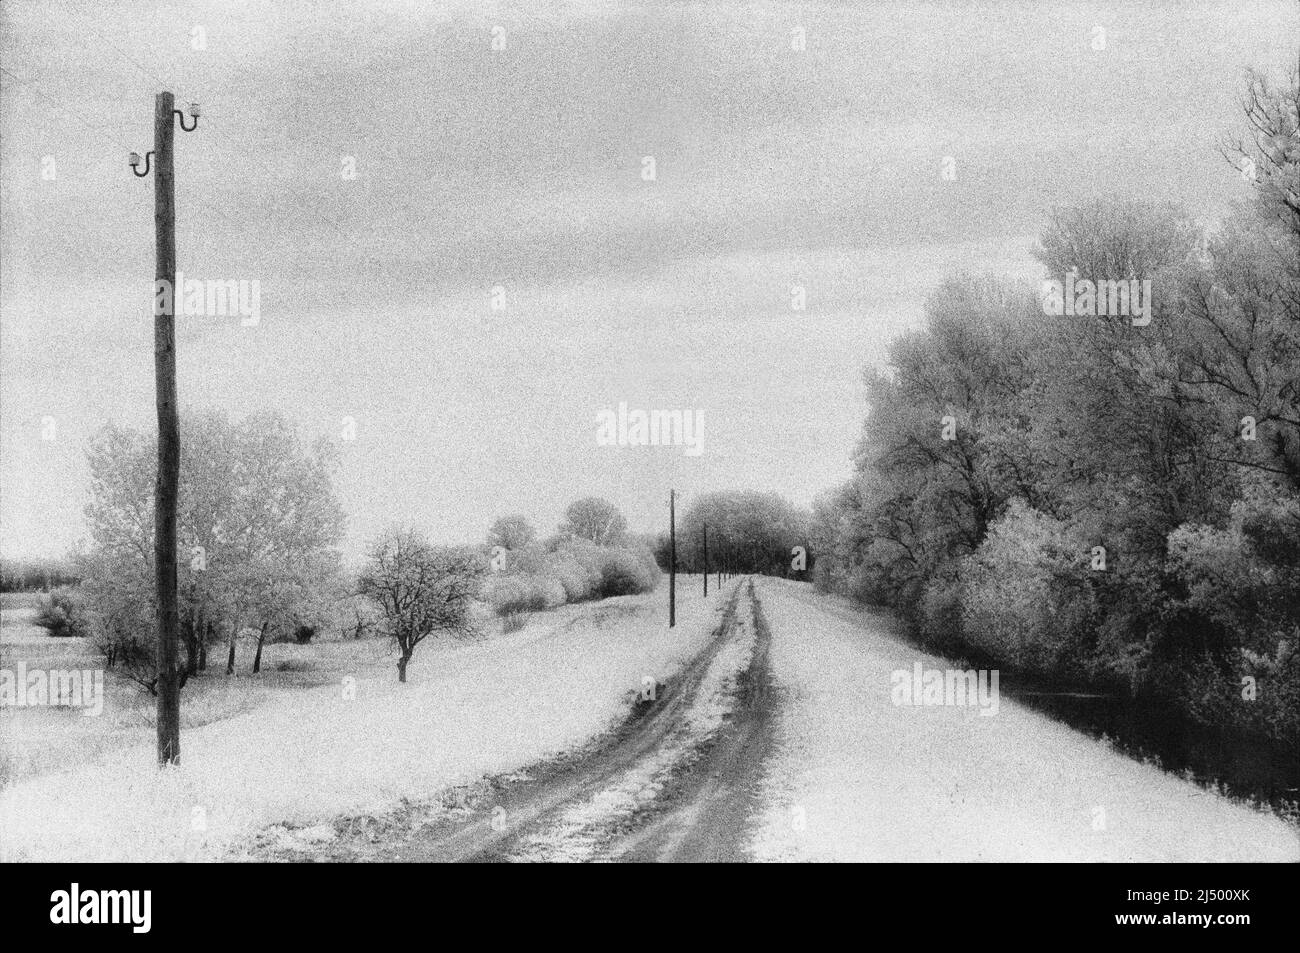 Monochrome infrared photograph of the Tisza embankment from April. Scanned infrared photo from black and white negative film. Stock Photo